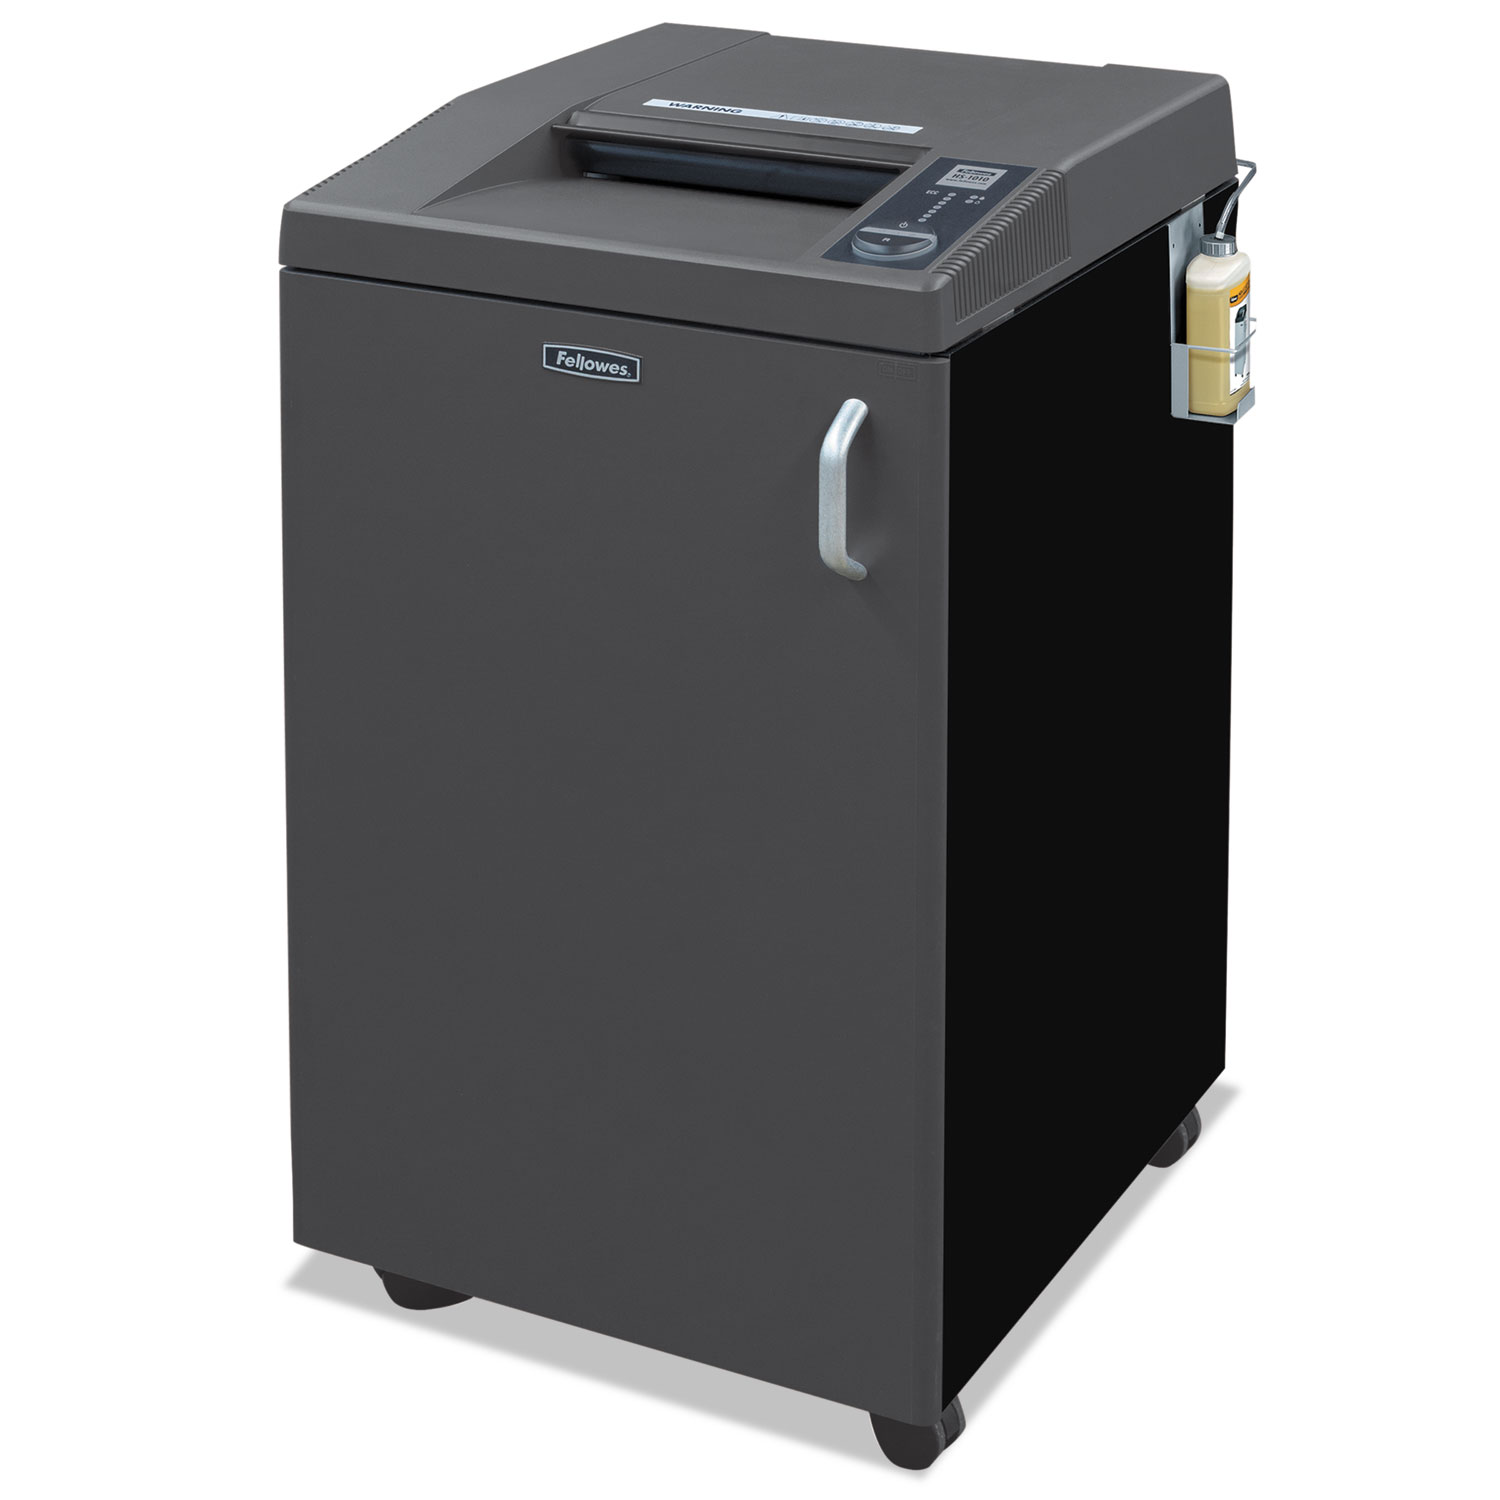  Fellowes 3306601 Fortishred HS-1010 High Security NSA Approved Cross-Cut Shredder, 10 Manual Sheet Capacity, TAA Compliant (FEL3306601) 